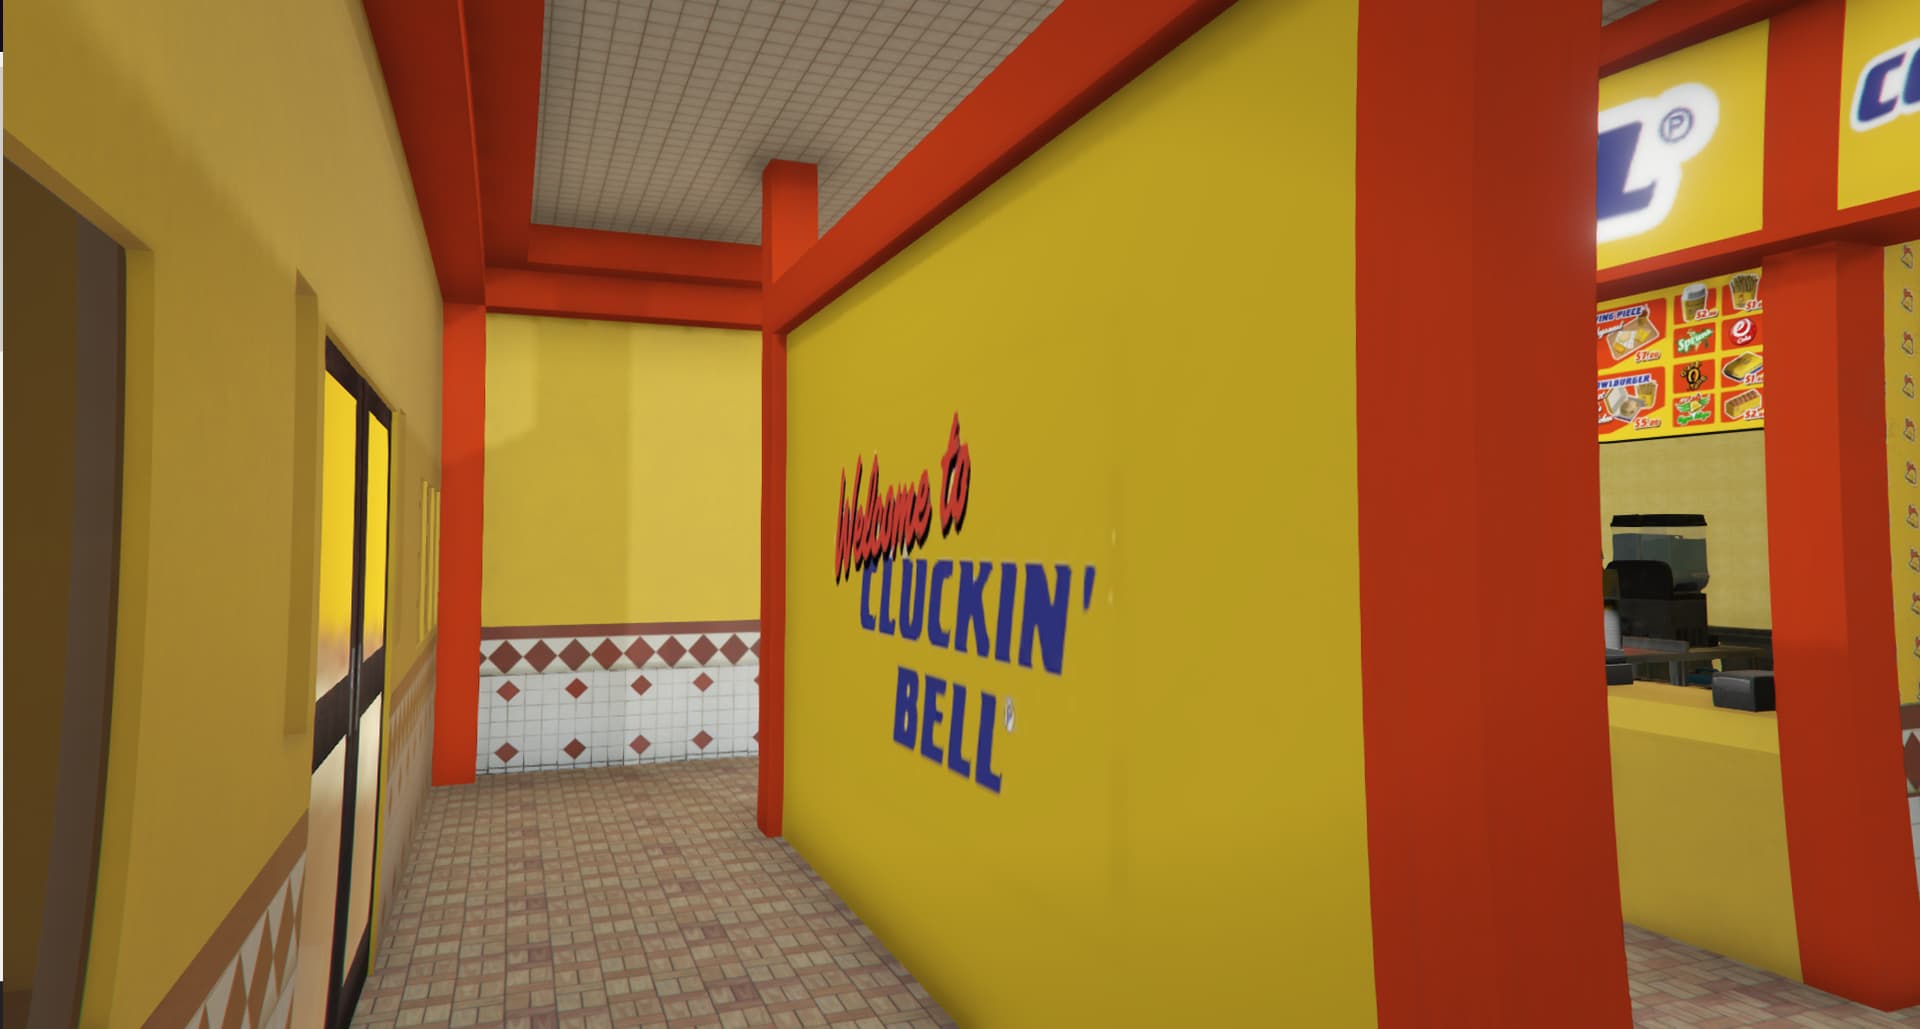 [PAID] [MLO] Cluckin' Bell (Vespucci Beach) - Releases - Cfx.re Community